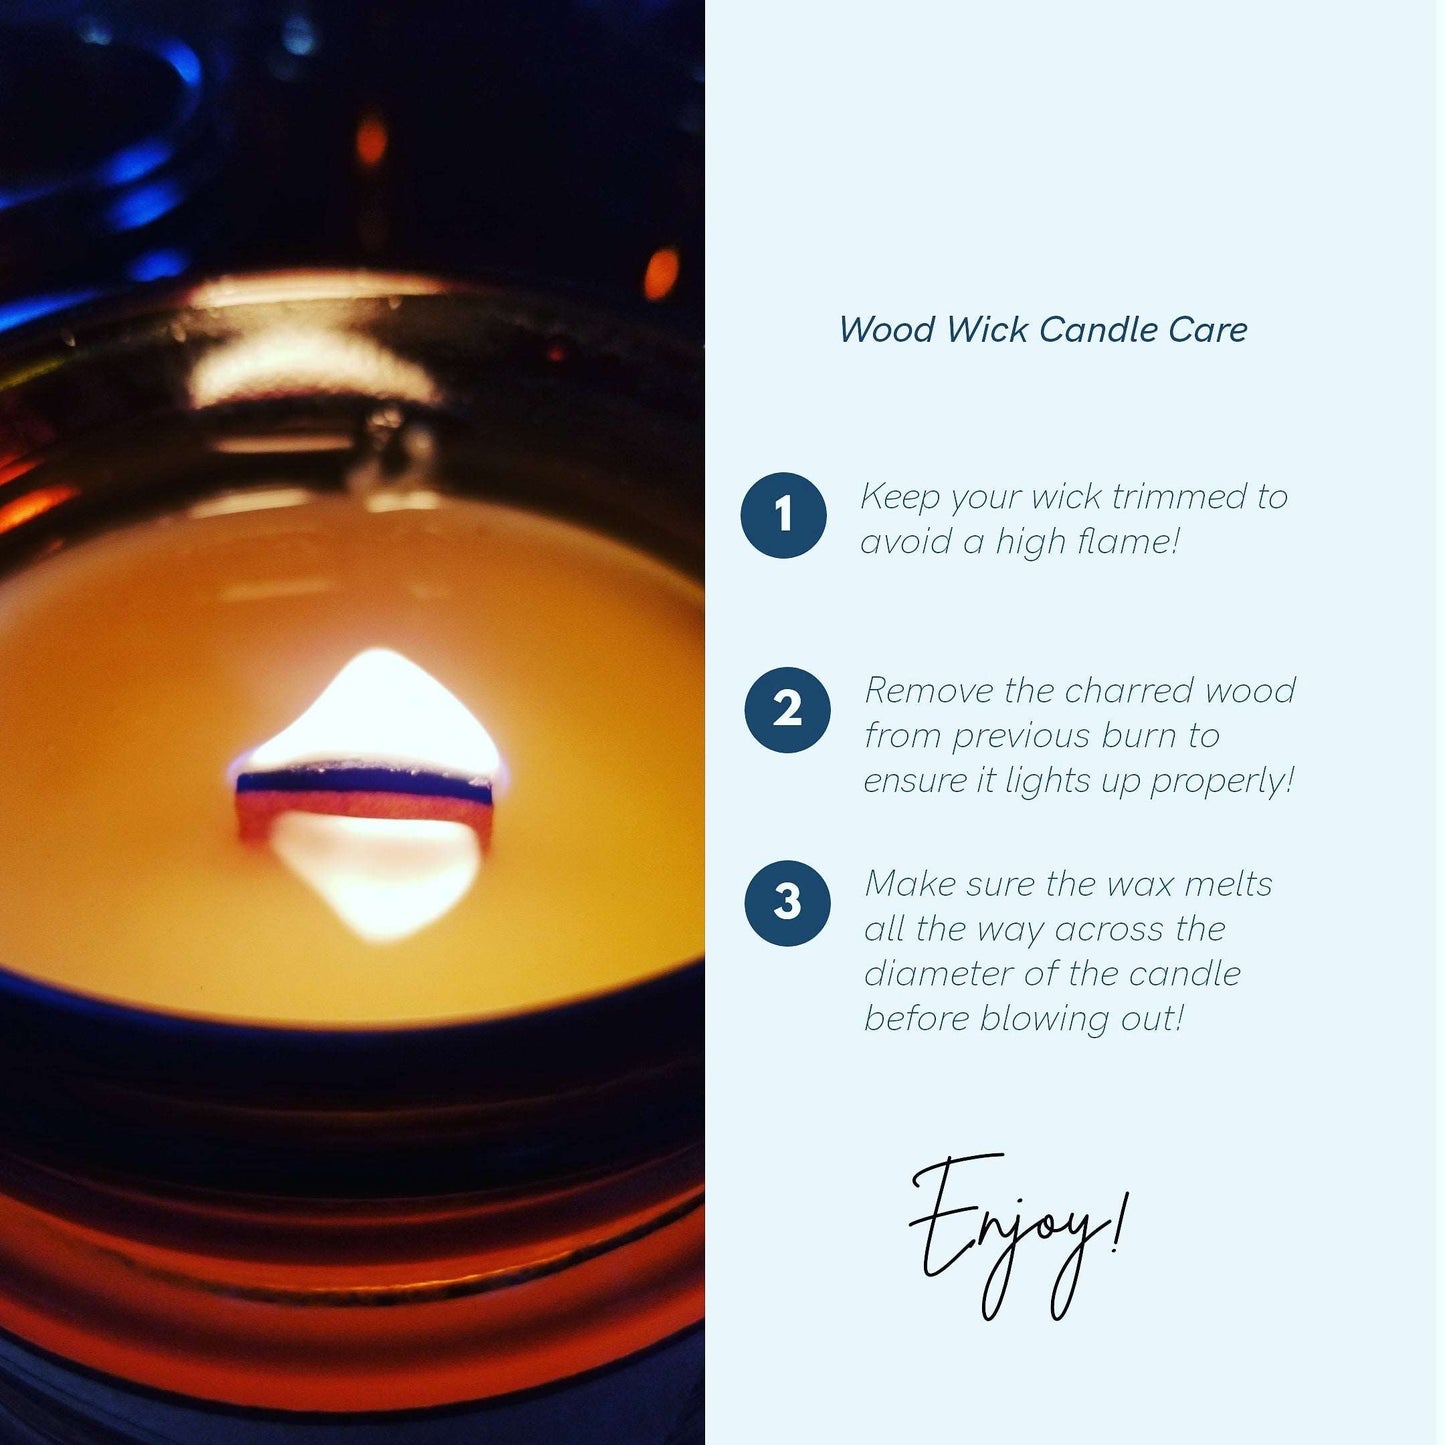 Out to Pasture | Soy Candle with Wooden Wick | Campfire Candles